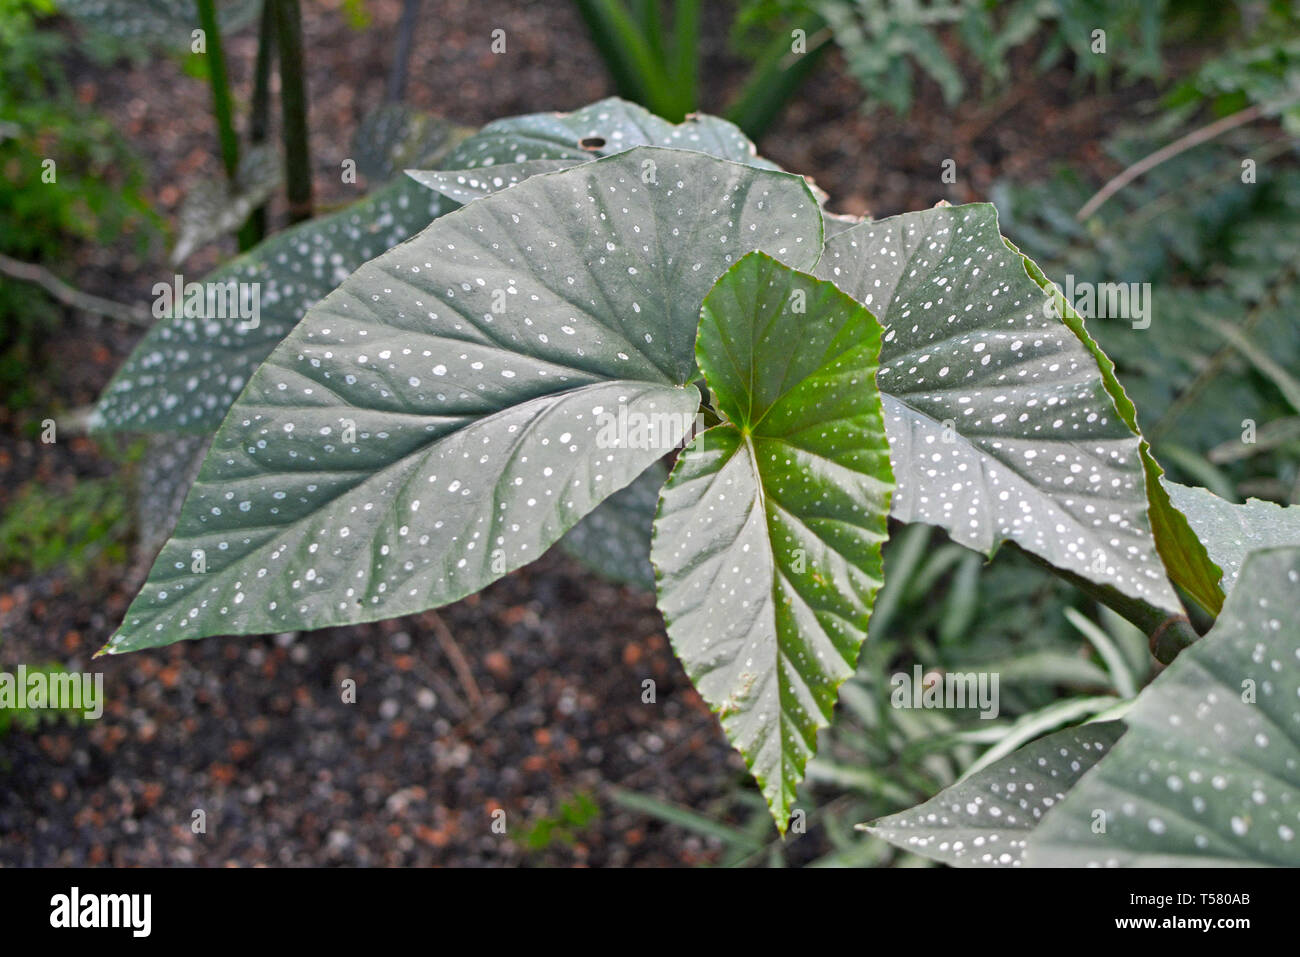 Exotic Cane Begonia Corallina de Lucerna plant with big green leaves and small white dots Stock Photo